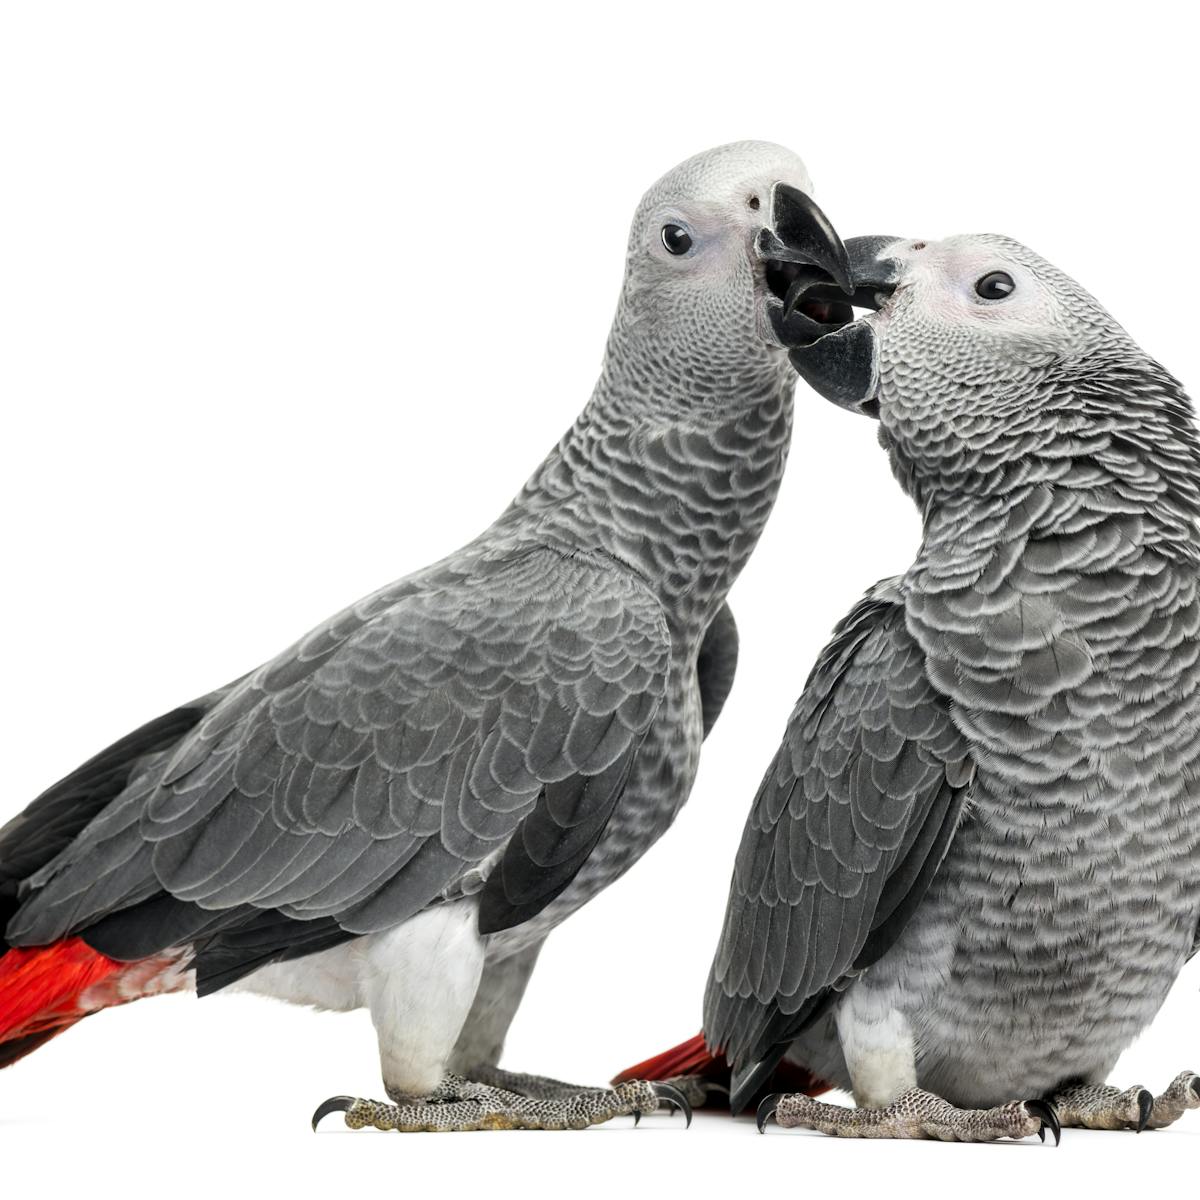 African grey parrots help each other in times of need